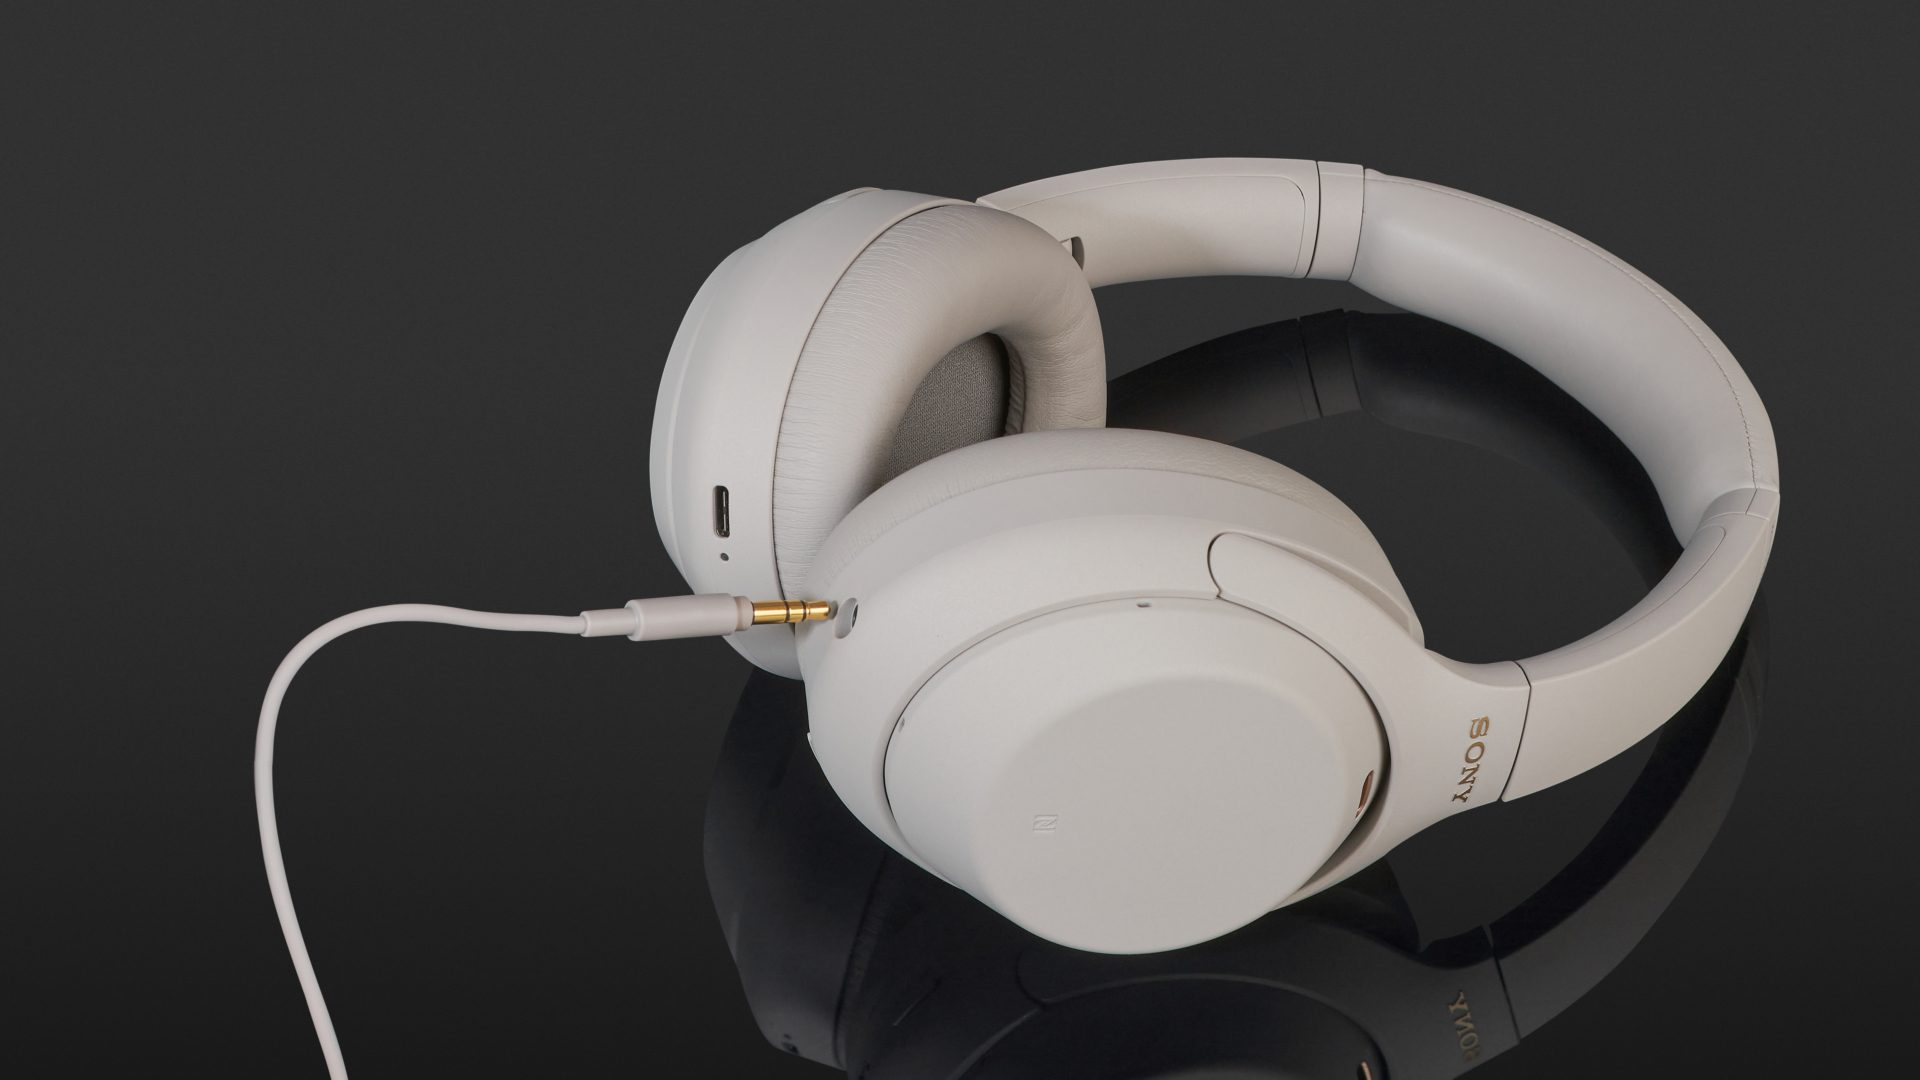 How to operate the WH-1000XM4 headphones 